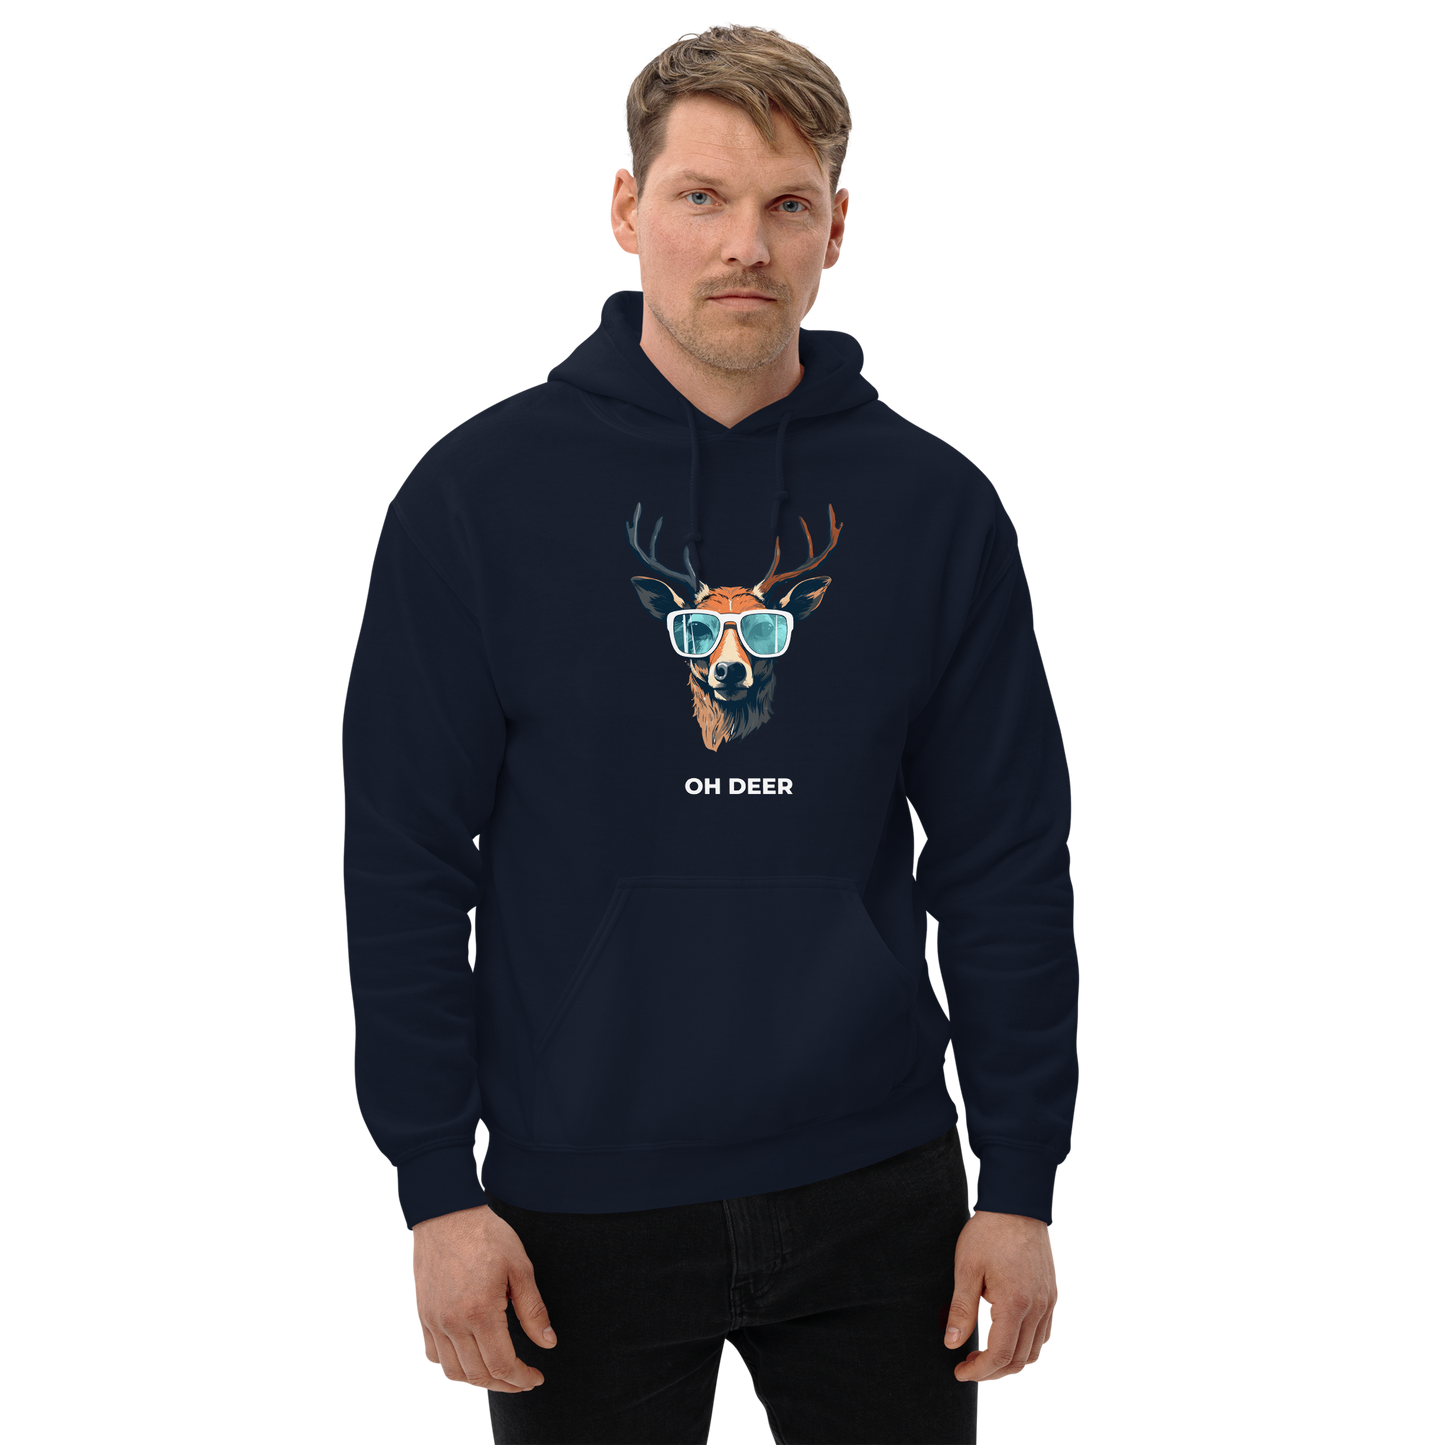 Man wearing a Navy Deer Hoodie featuring a hilarious Oh Deer graphic on the chest - Funny Graphic Deer Hoodies - Boozy Fox